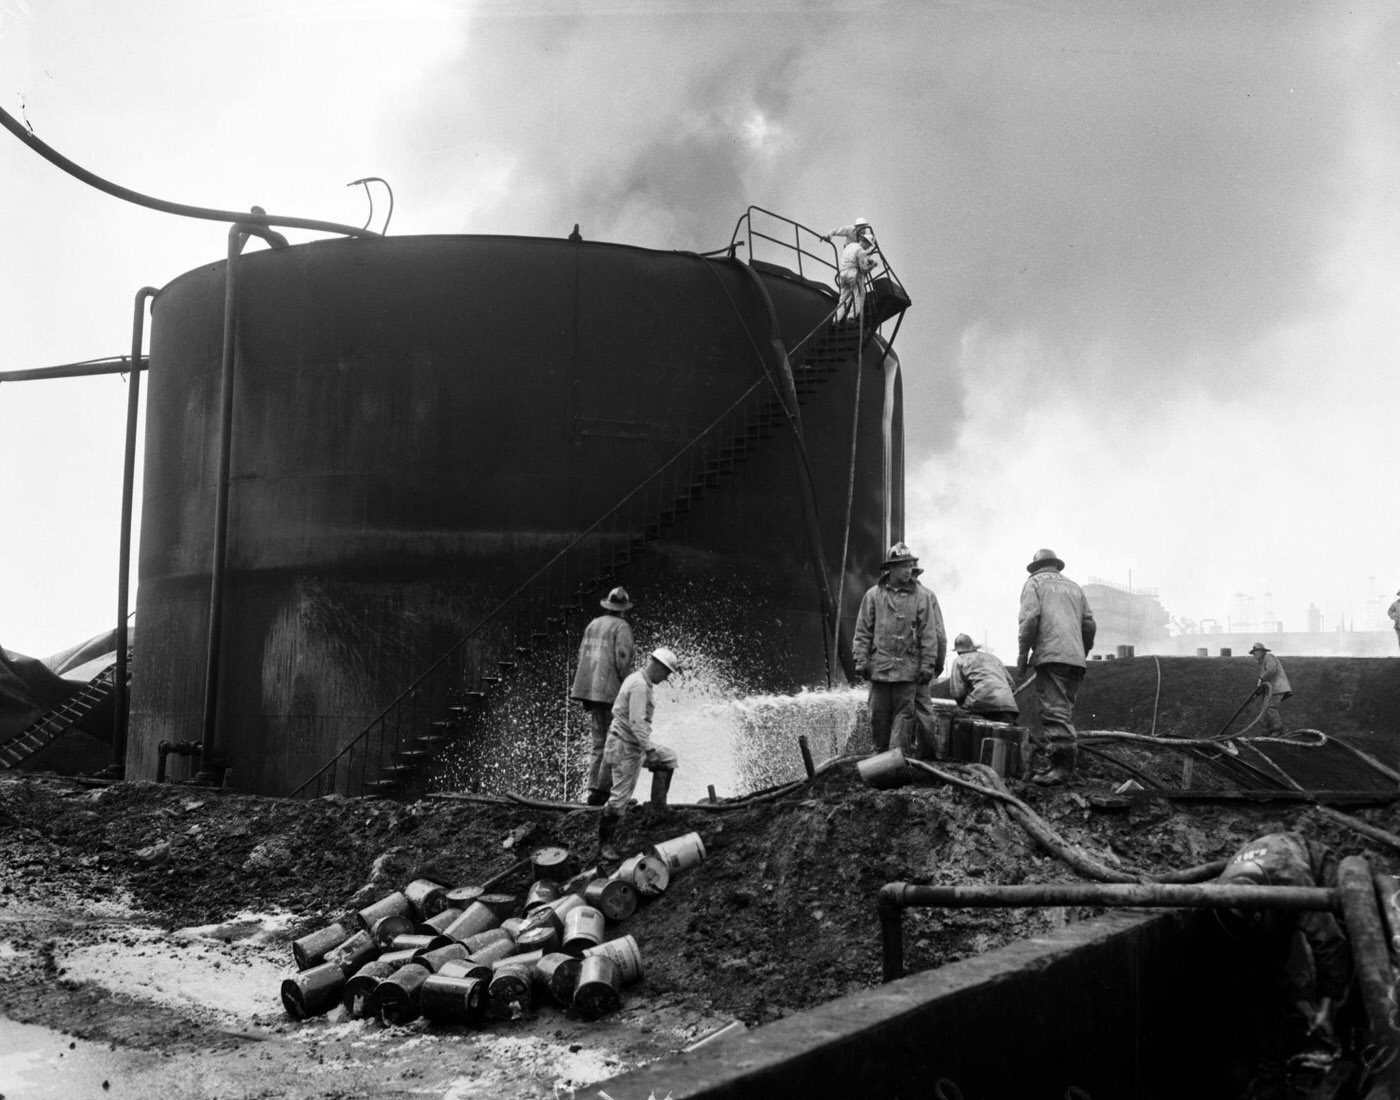 Hancock Oil Fire Clean-Up and Partially Damaged Towers, 1958